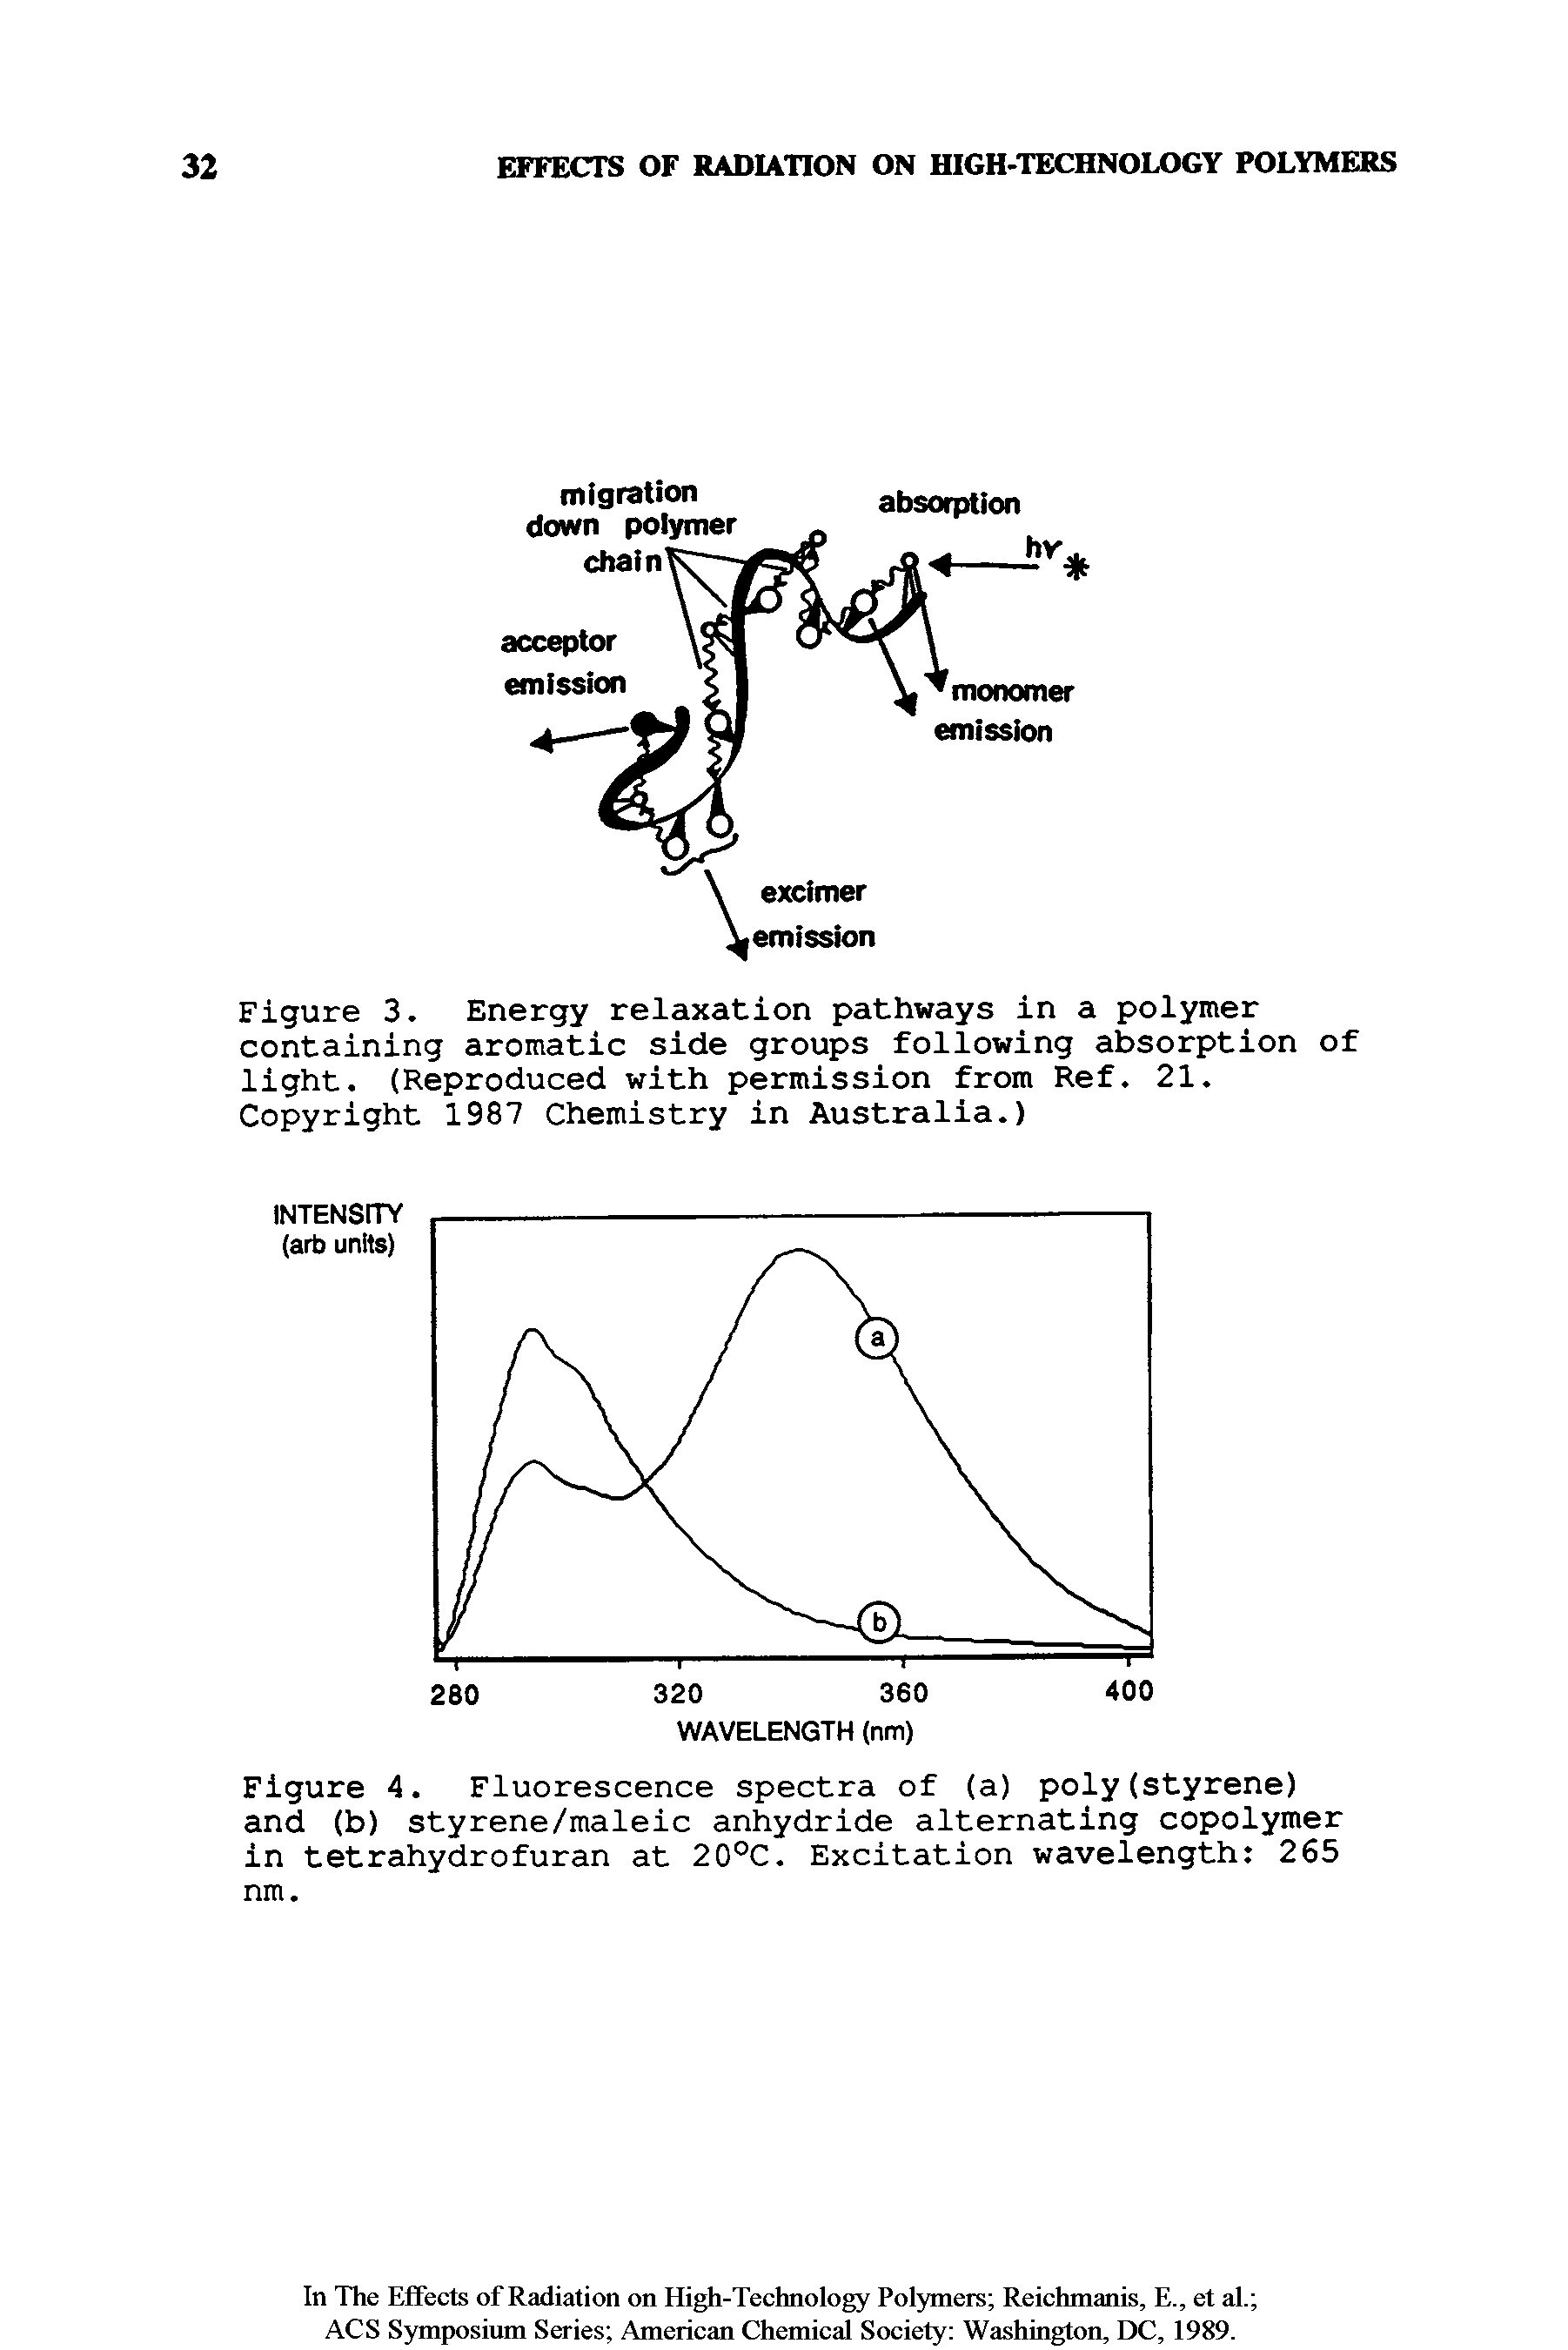 Figure 3. Energy relaxation pathways in a polymer containing aromatic side groups following absorption of light. (Reproduced with permission from Ref. 21. Copyright 1987 Chemistry in Australia.)...